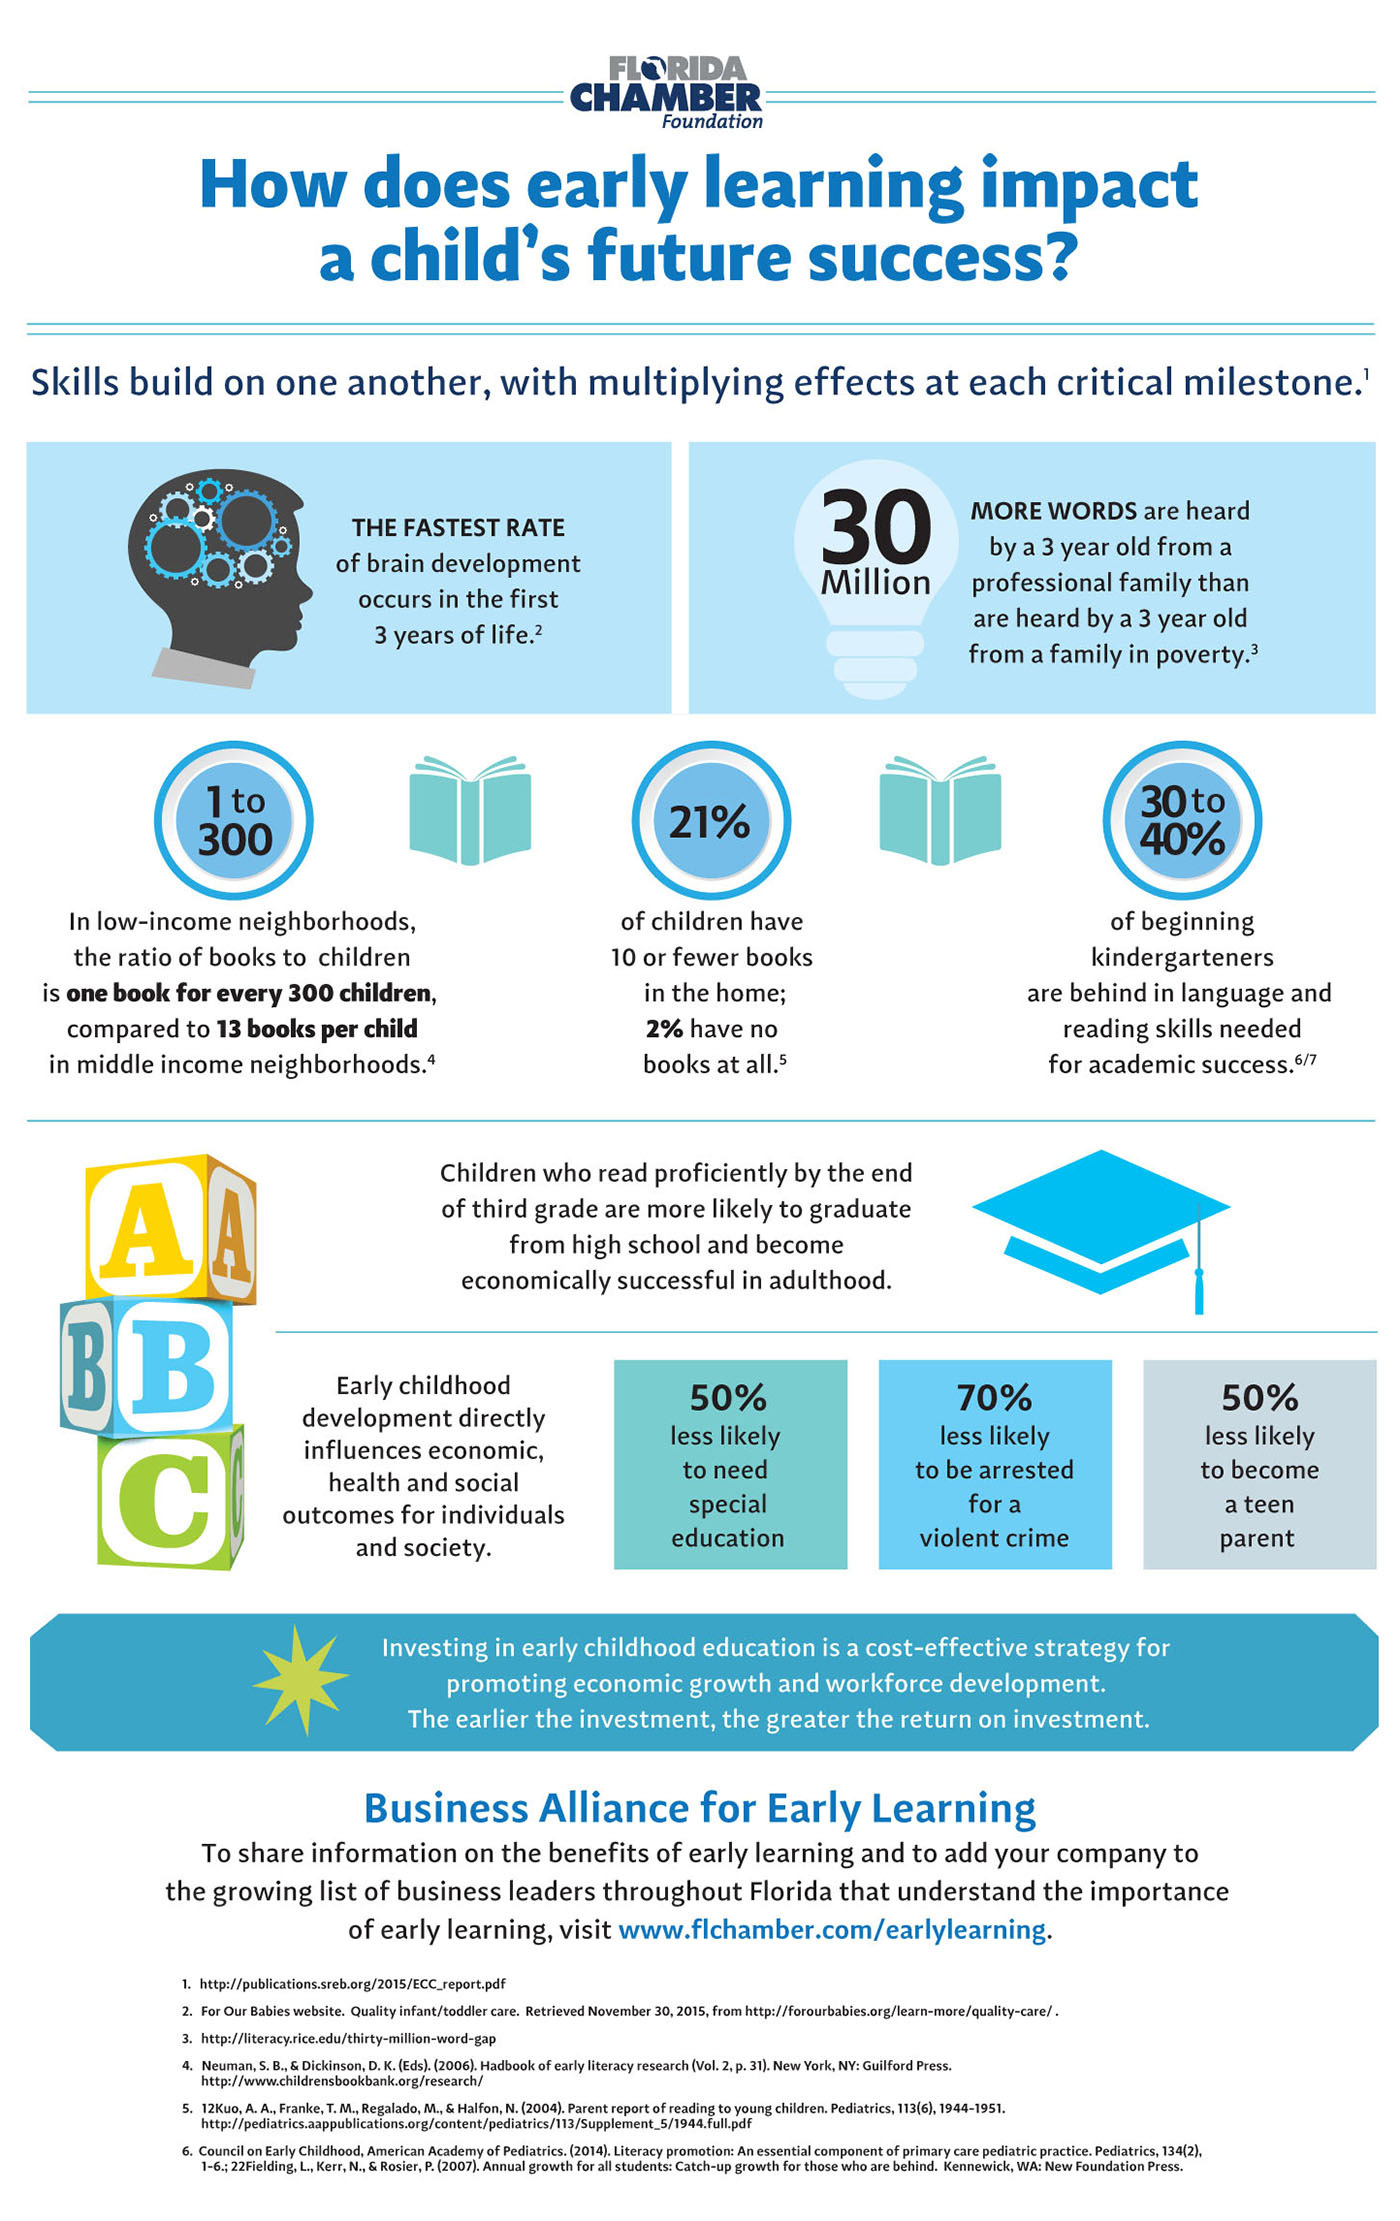 How does early learning impact a child's success?